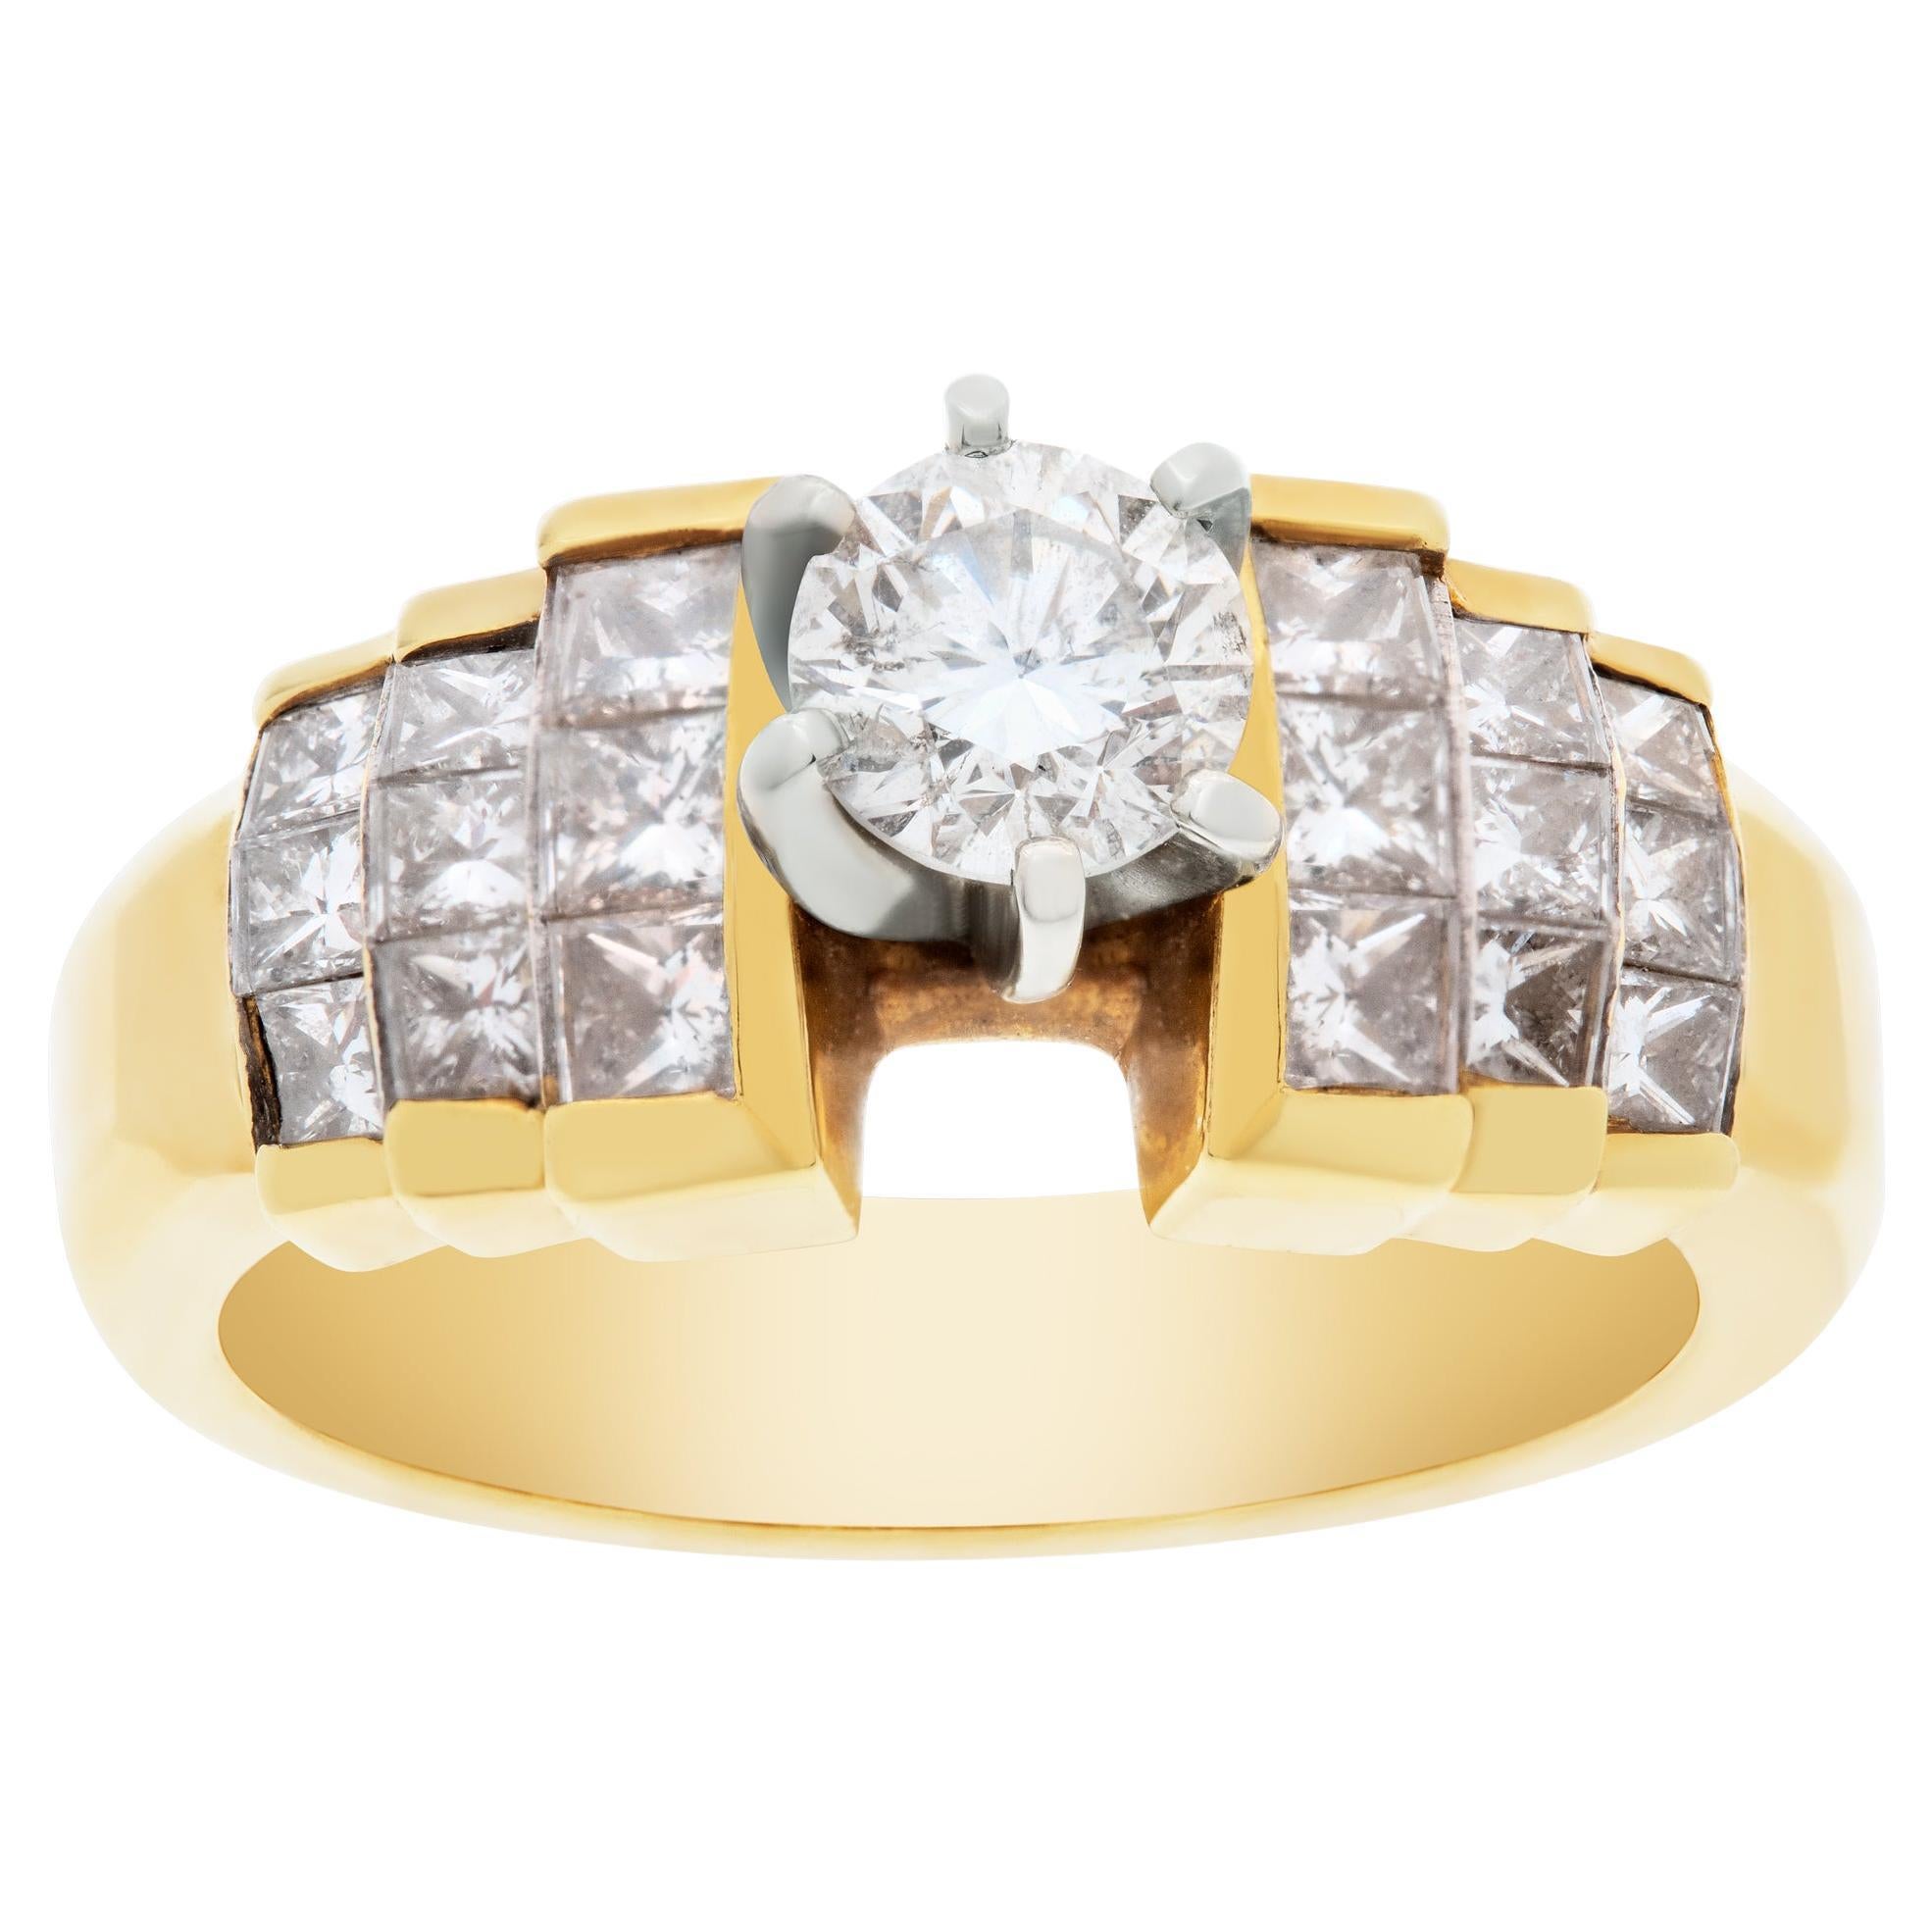 Diamond Engagement Ring in 18k Yellow Gold with 0.45 Carat Center Diamond For Sale